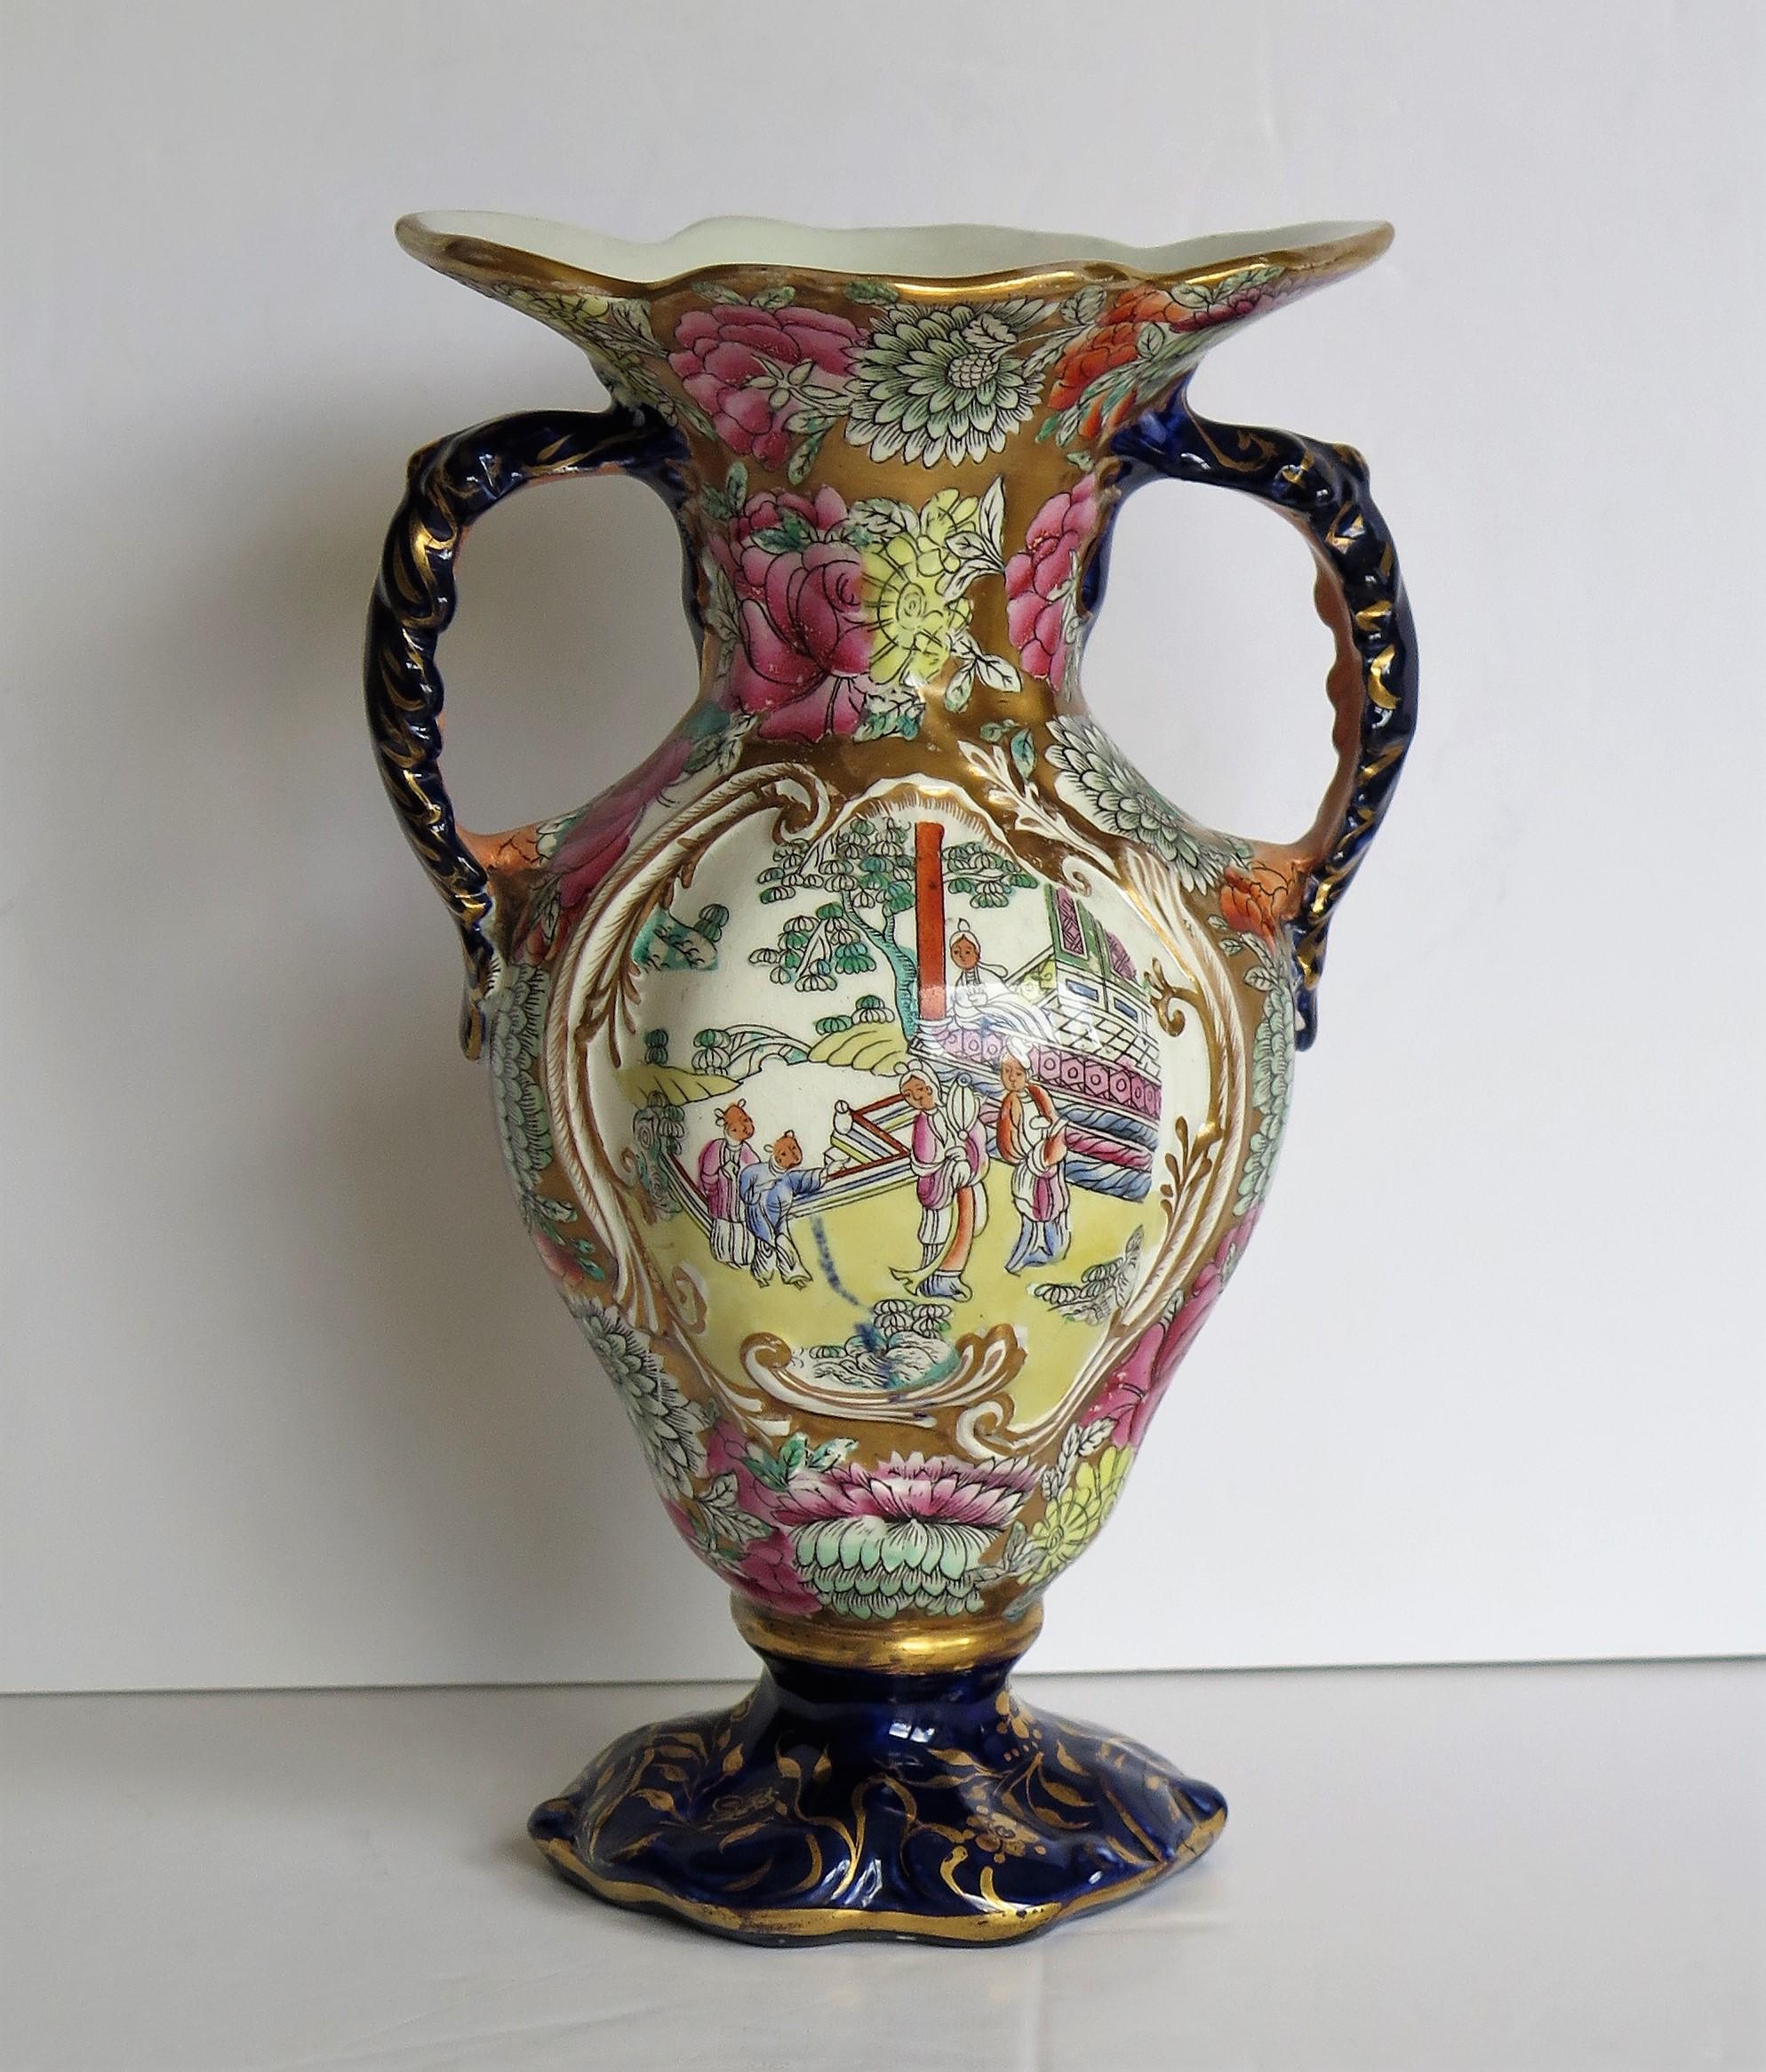 This is a very decorative ironstone twin handled vase made by the English Mason's Ironstone factory, dating to the late Georgian period, circa 1825.

The body is well potted with a hexagonal baluster form, a flaired wavy rim and two loop handles